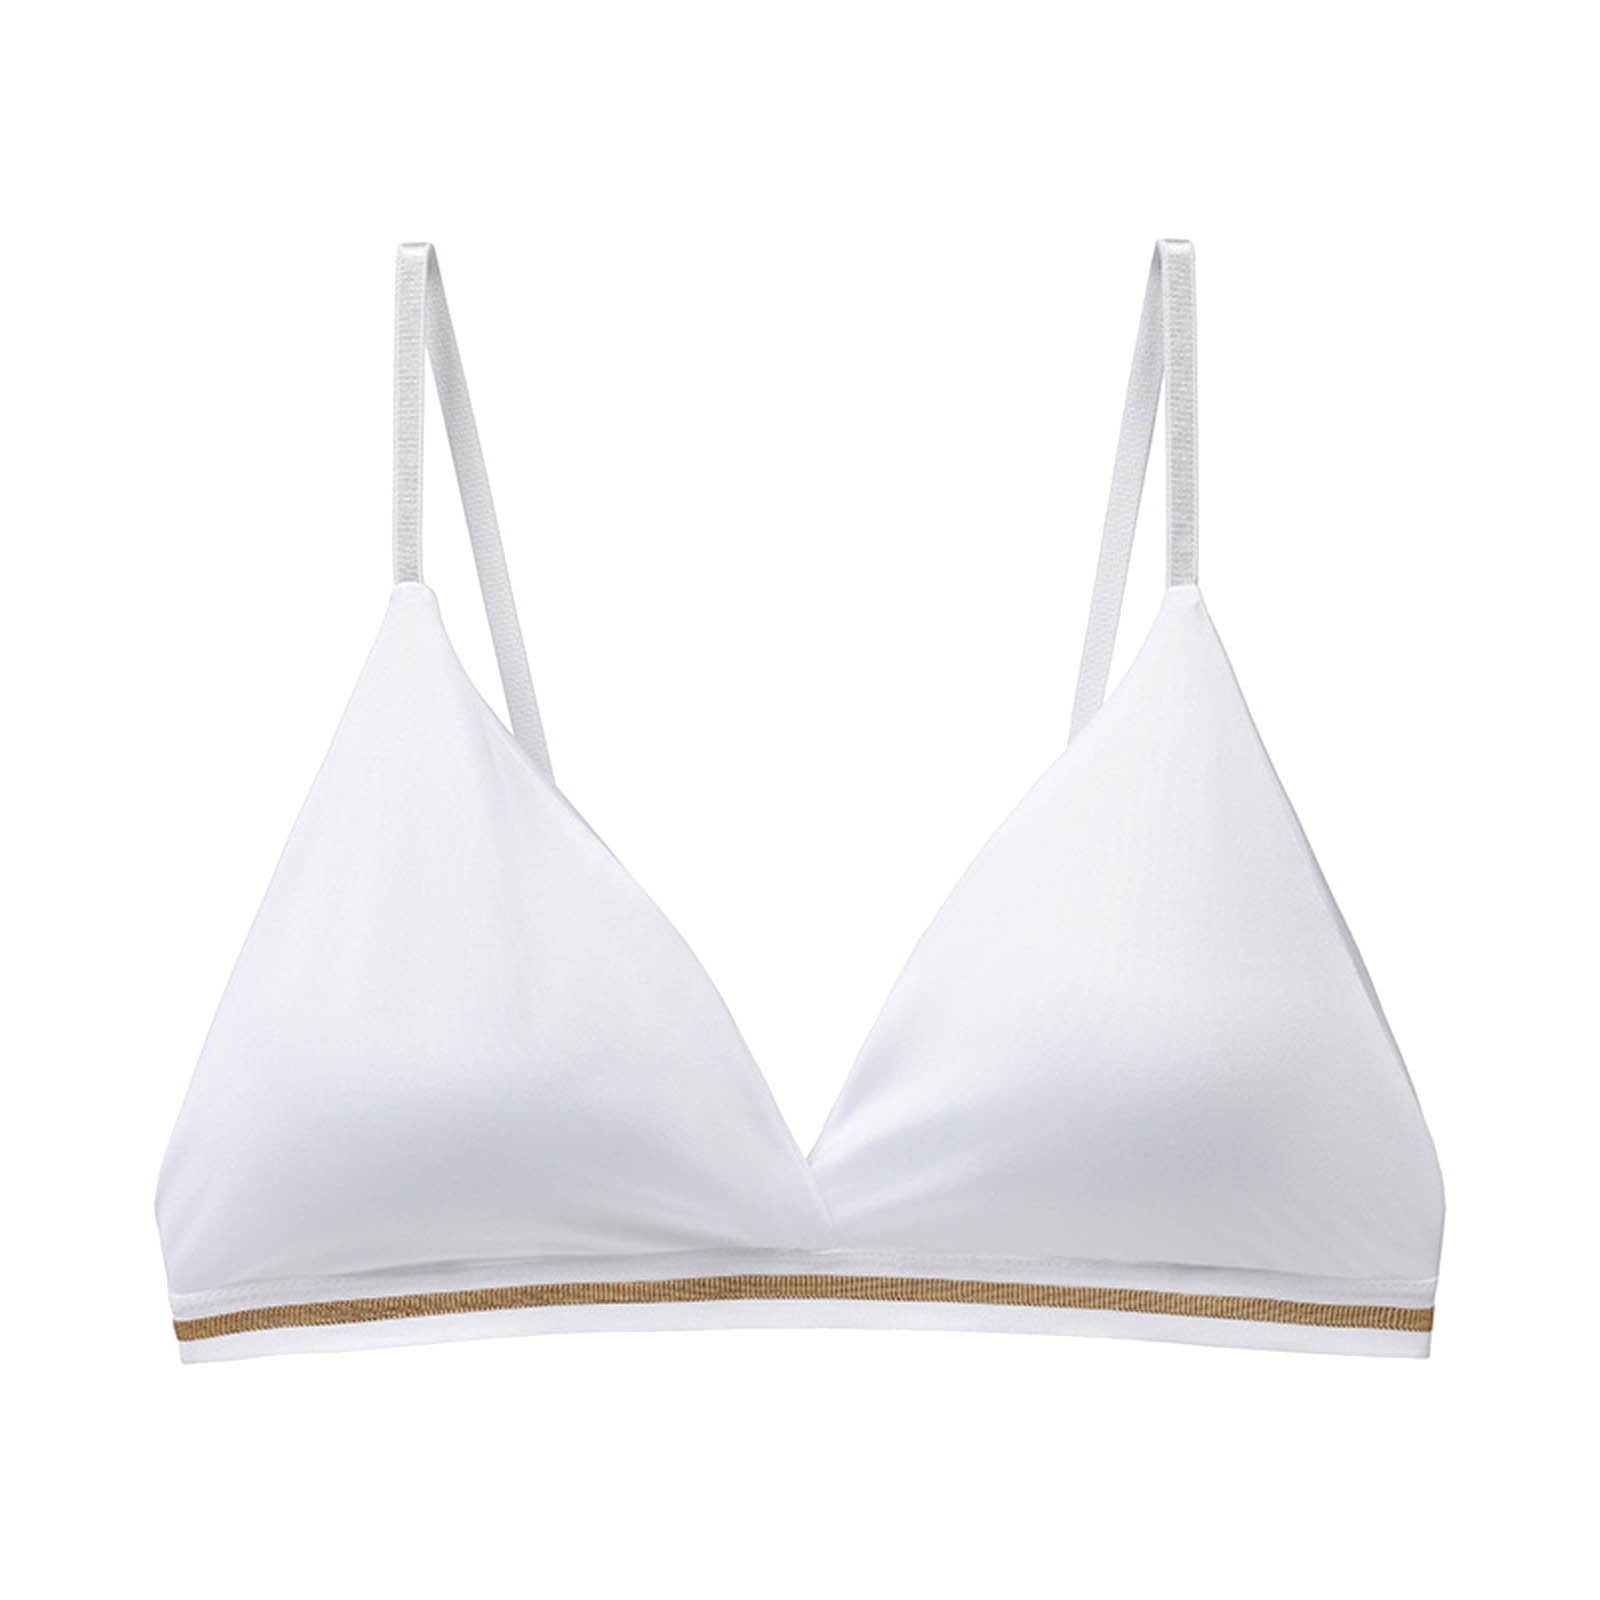 RYRJJ Women's Silk Satin Triangle Bralette Soft Cup Wireless Bra Smooth and  Comfortable Wire Free Bra Top(White,S) 